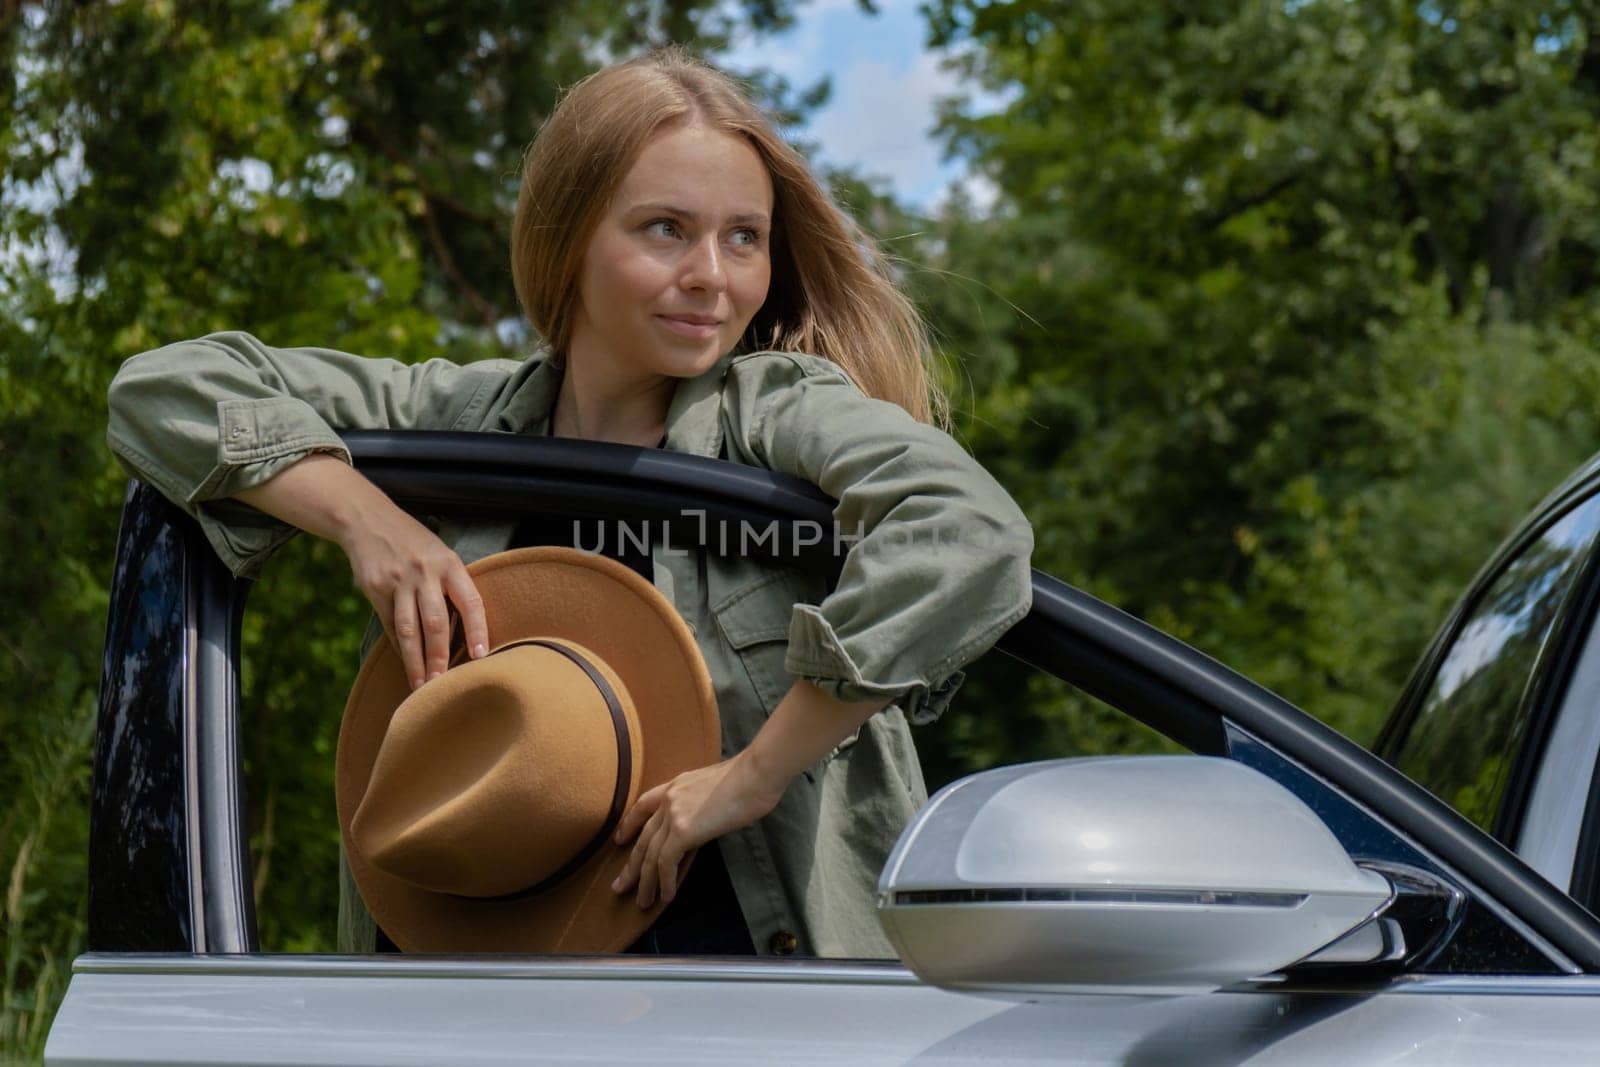 Smiling young woman in hat stoped on road to make a break in driving car. Local solo travel on weekends concept. Exited woman explore freedom outdoors in forest. Unity with nature lifestyle, rest recharge relaxation